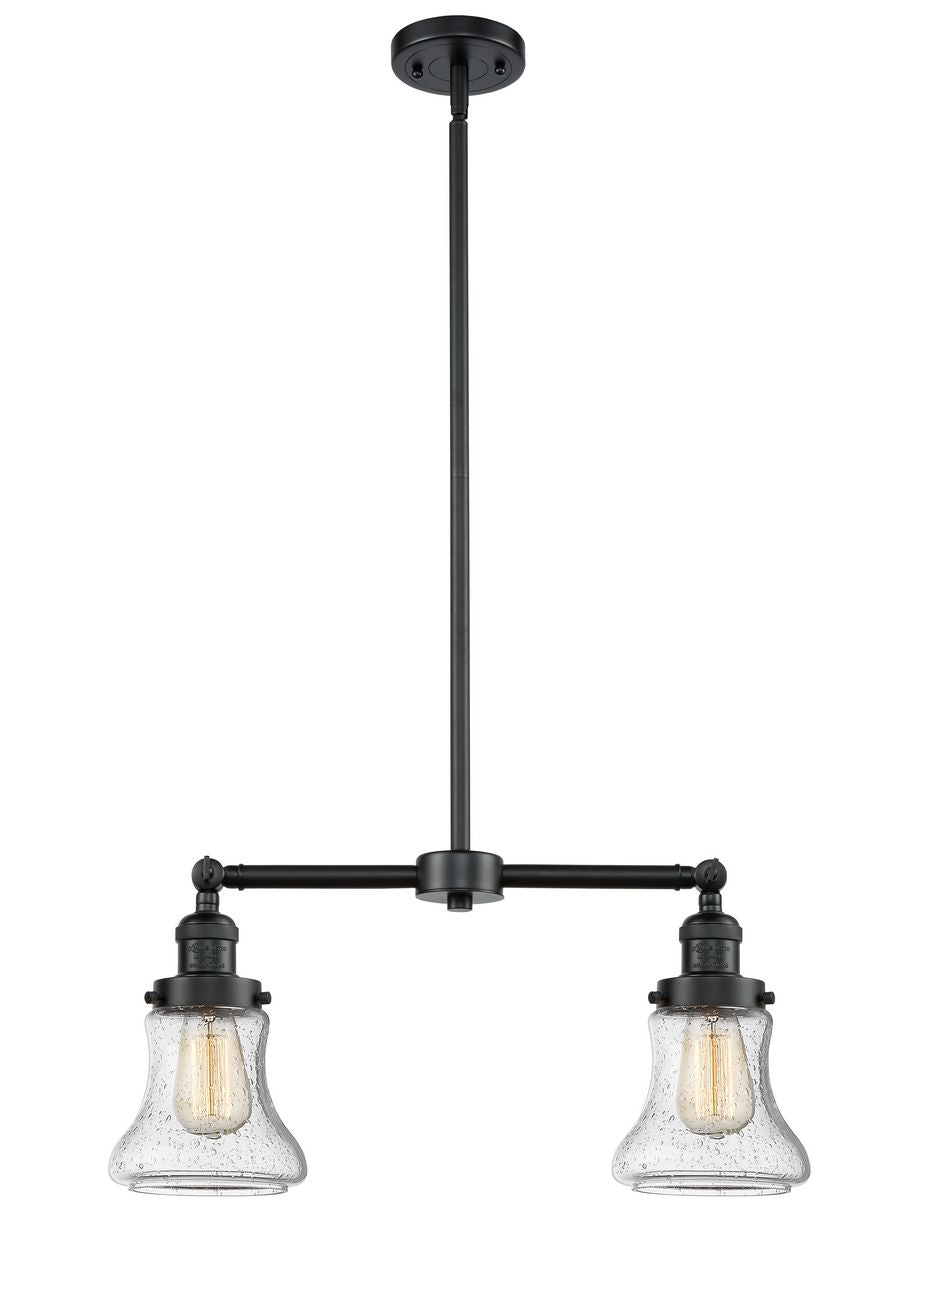 209-OB-G194 2-Light 21" Oil Rubbed Bronze Island Light - Seedy Bellmont Glass - LED Bulb - Dimmensions: 21 x 5 x 10<br>Minimum Height : 21.375<br>Maximum Height : 45.375 - Sloped Ceiling Compatible: Yes